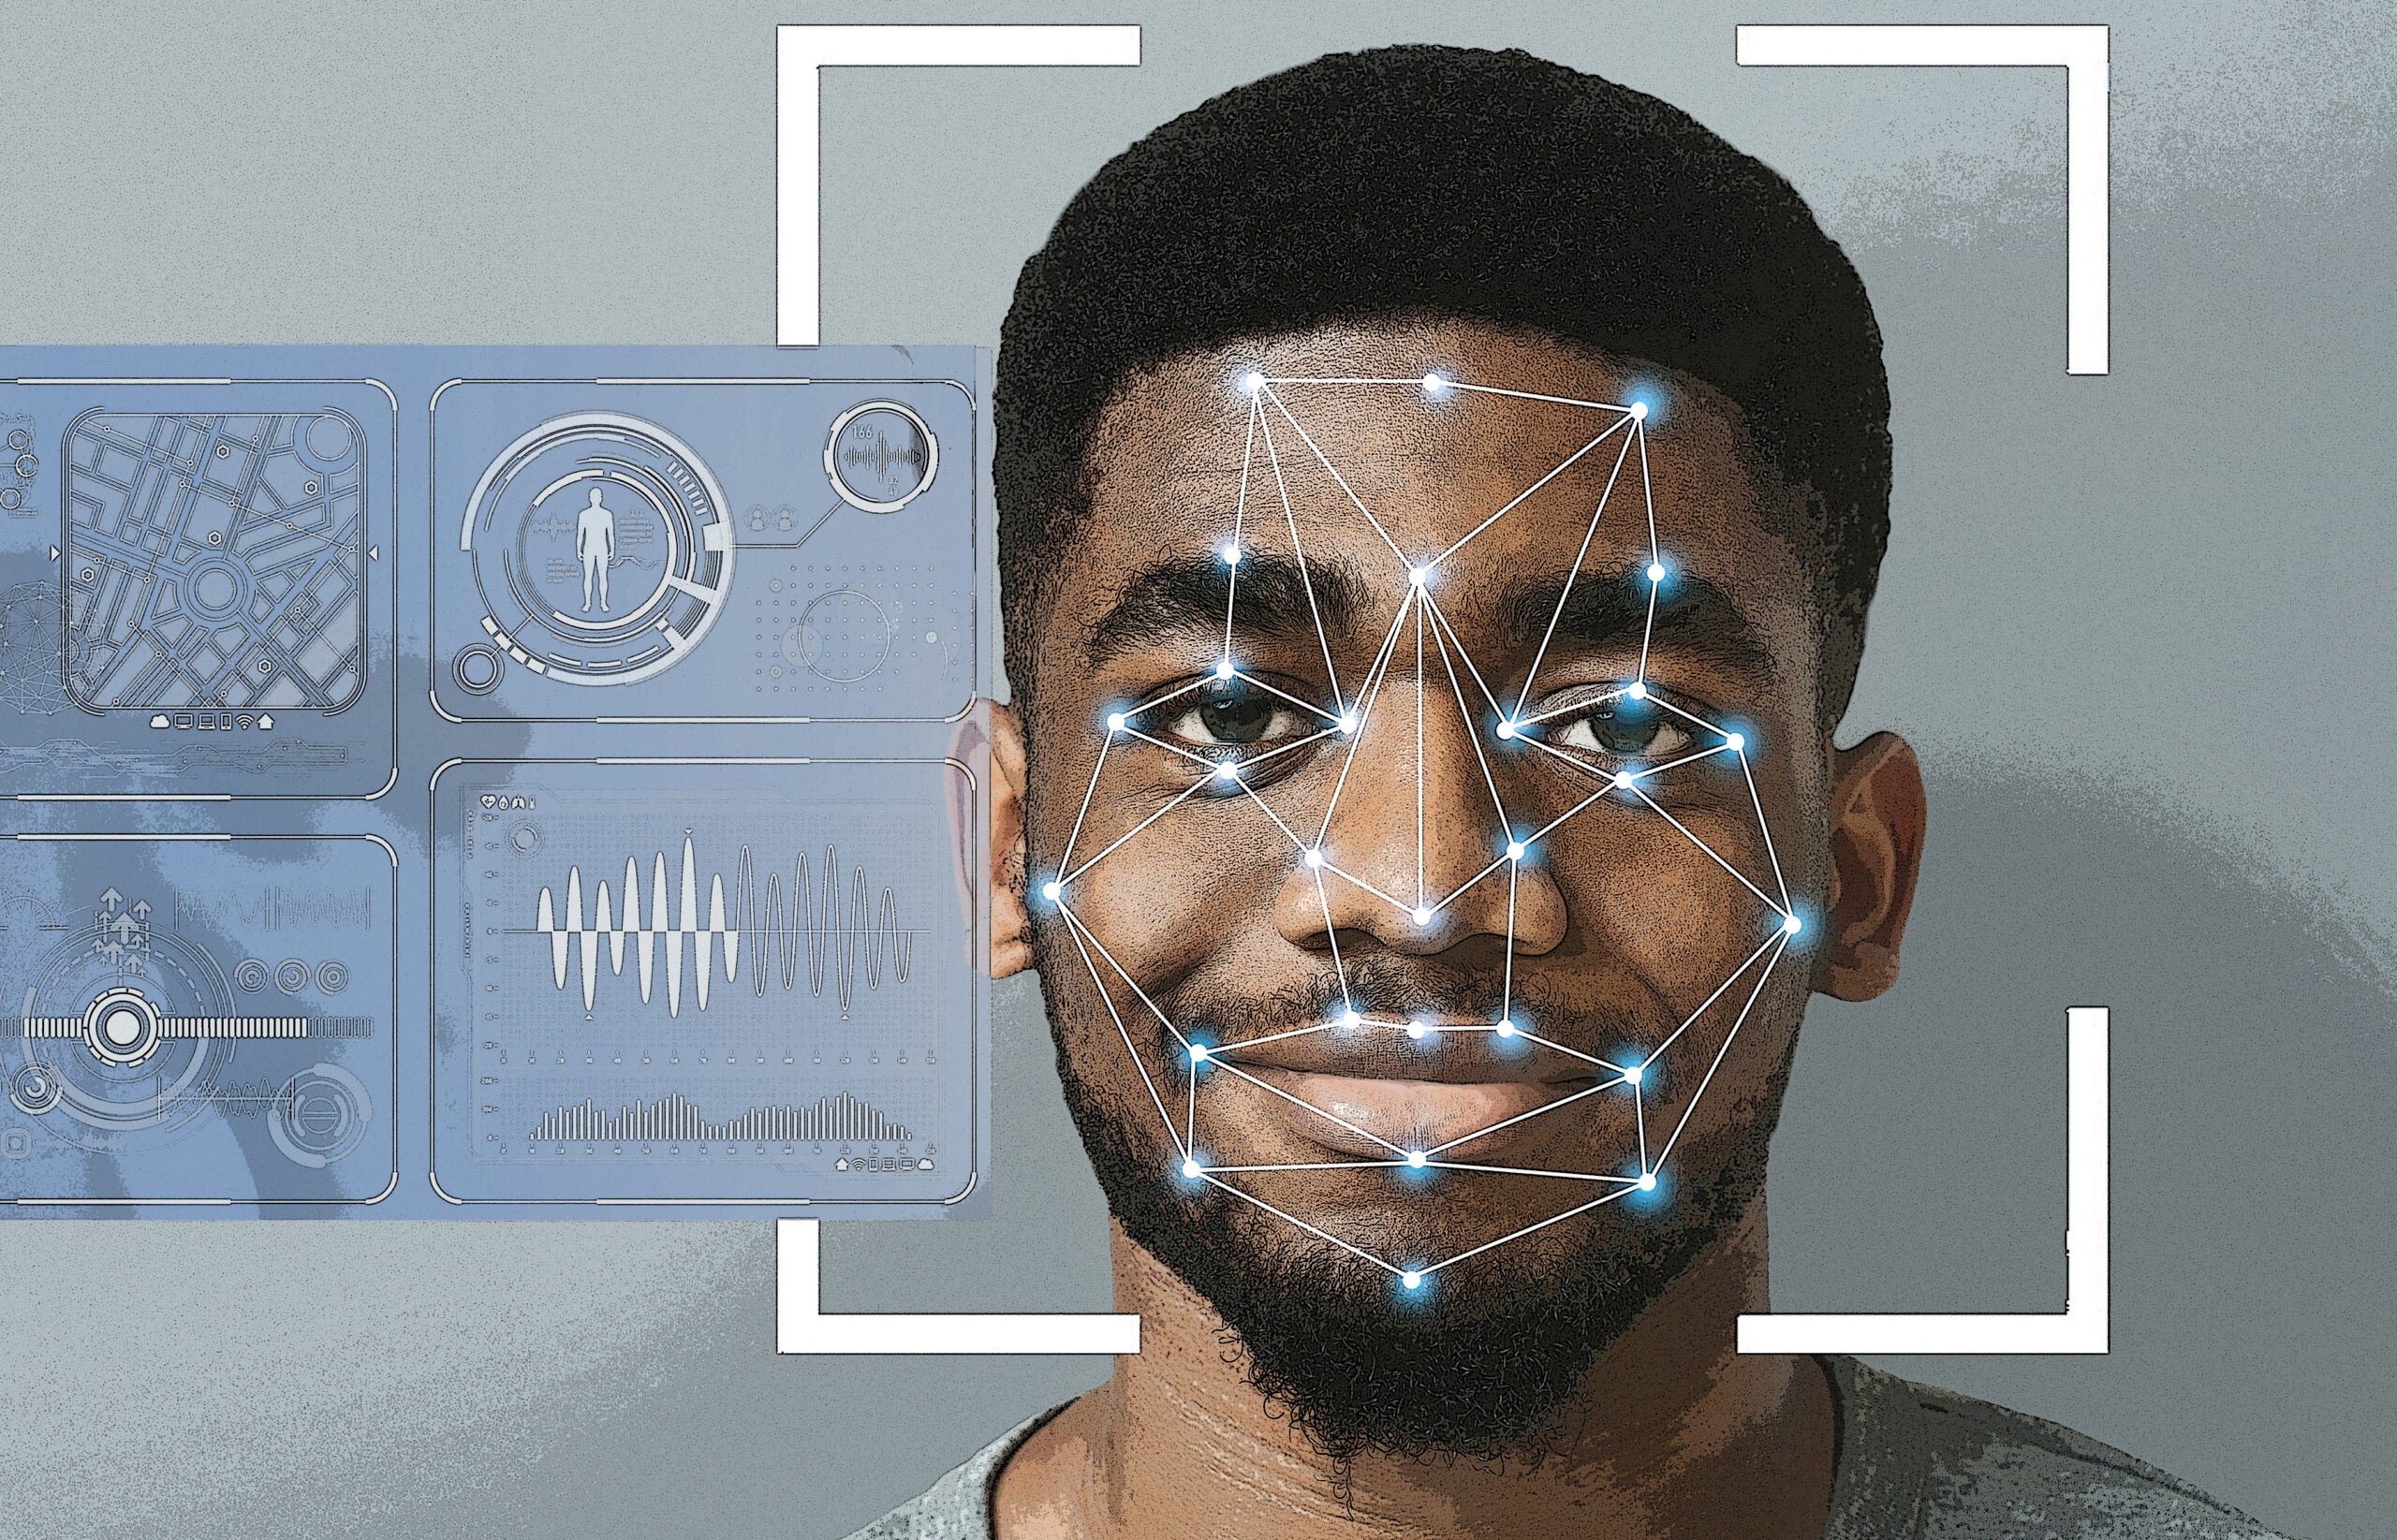 pauses sale of facial biometrics to police while advocates